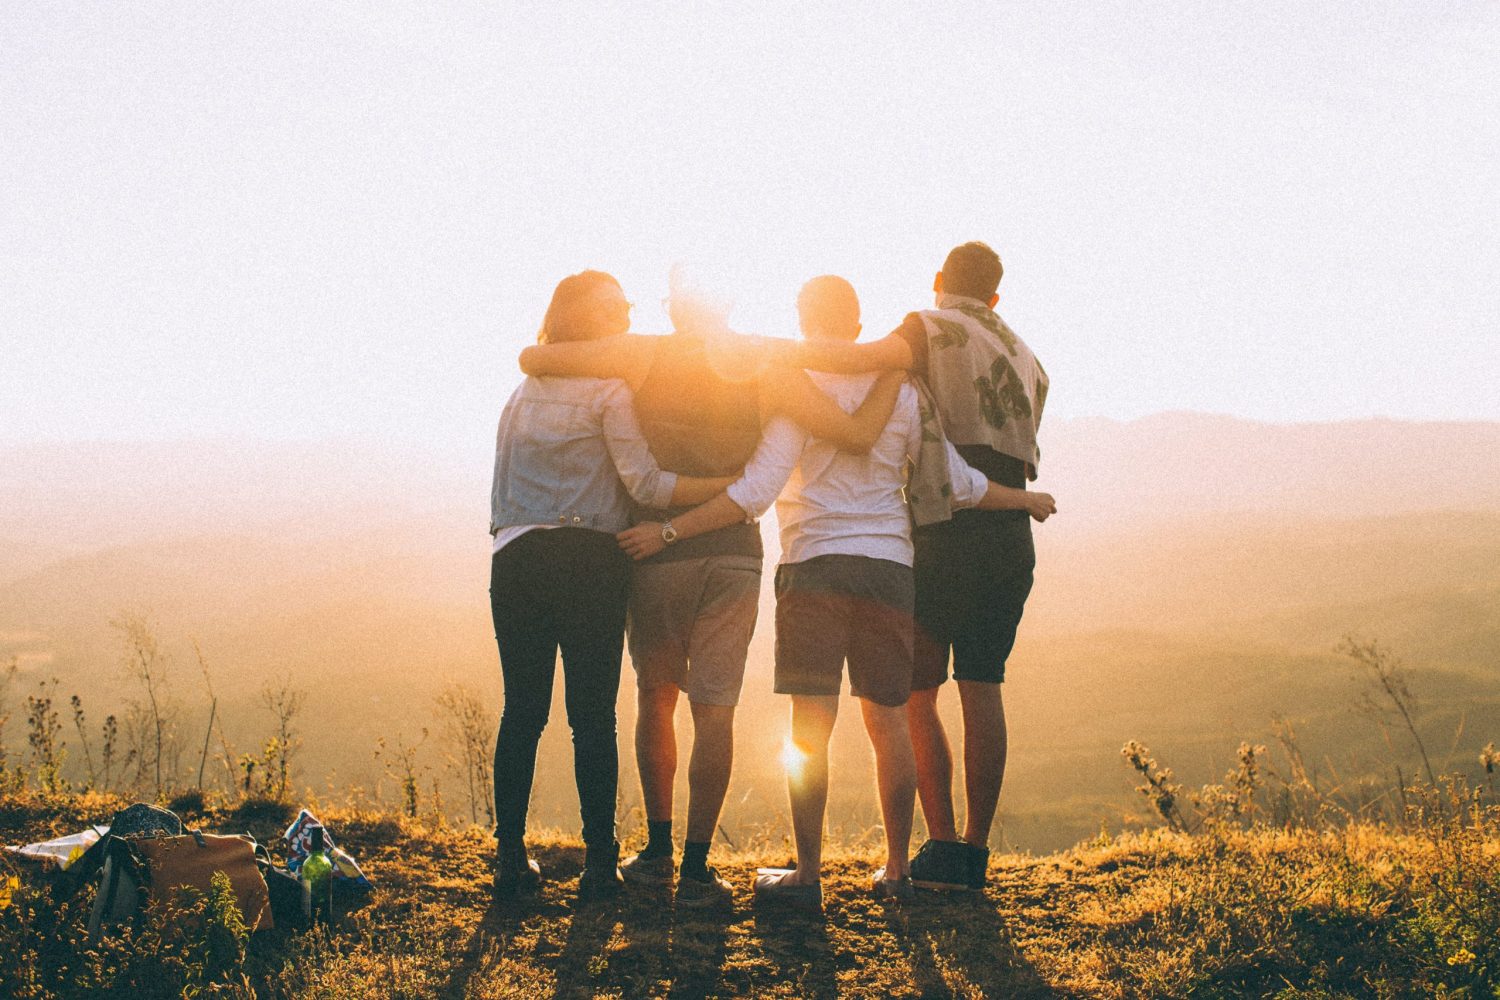 group hugging and watching the sunset during a hike